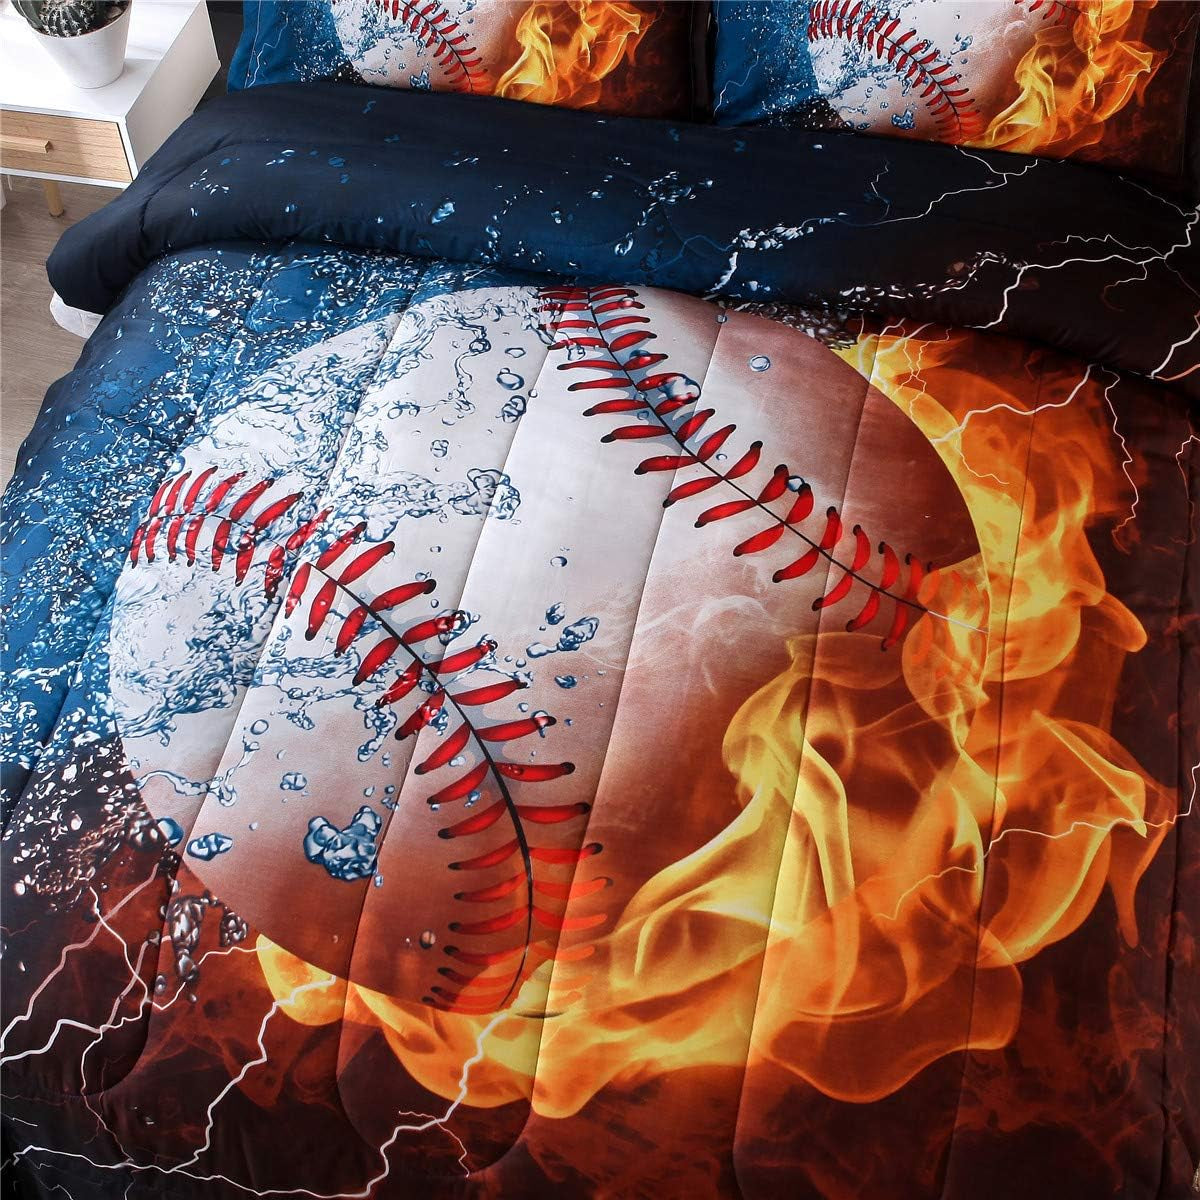 NTBED Baseball Comforter Set Full Size for Boys Teens,3D Sports Bedding Comforter,Fire Printed Quilt Set with 2 Pillow Shams